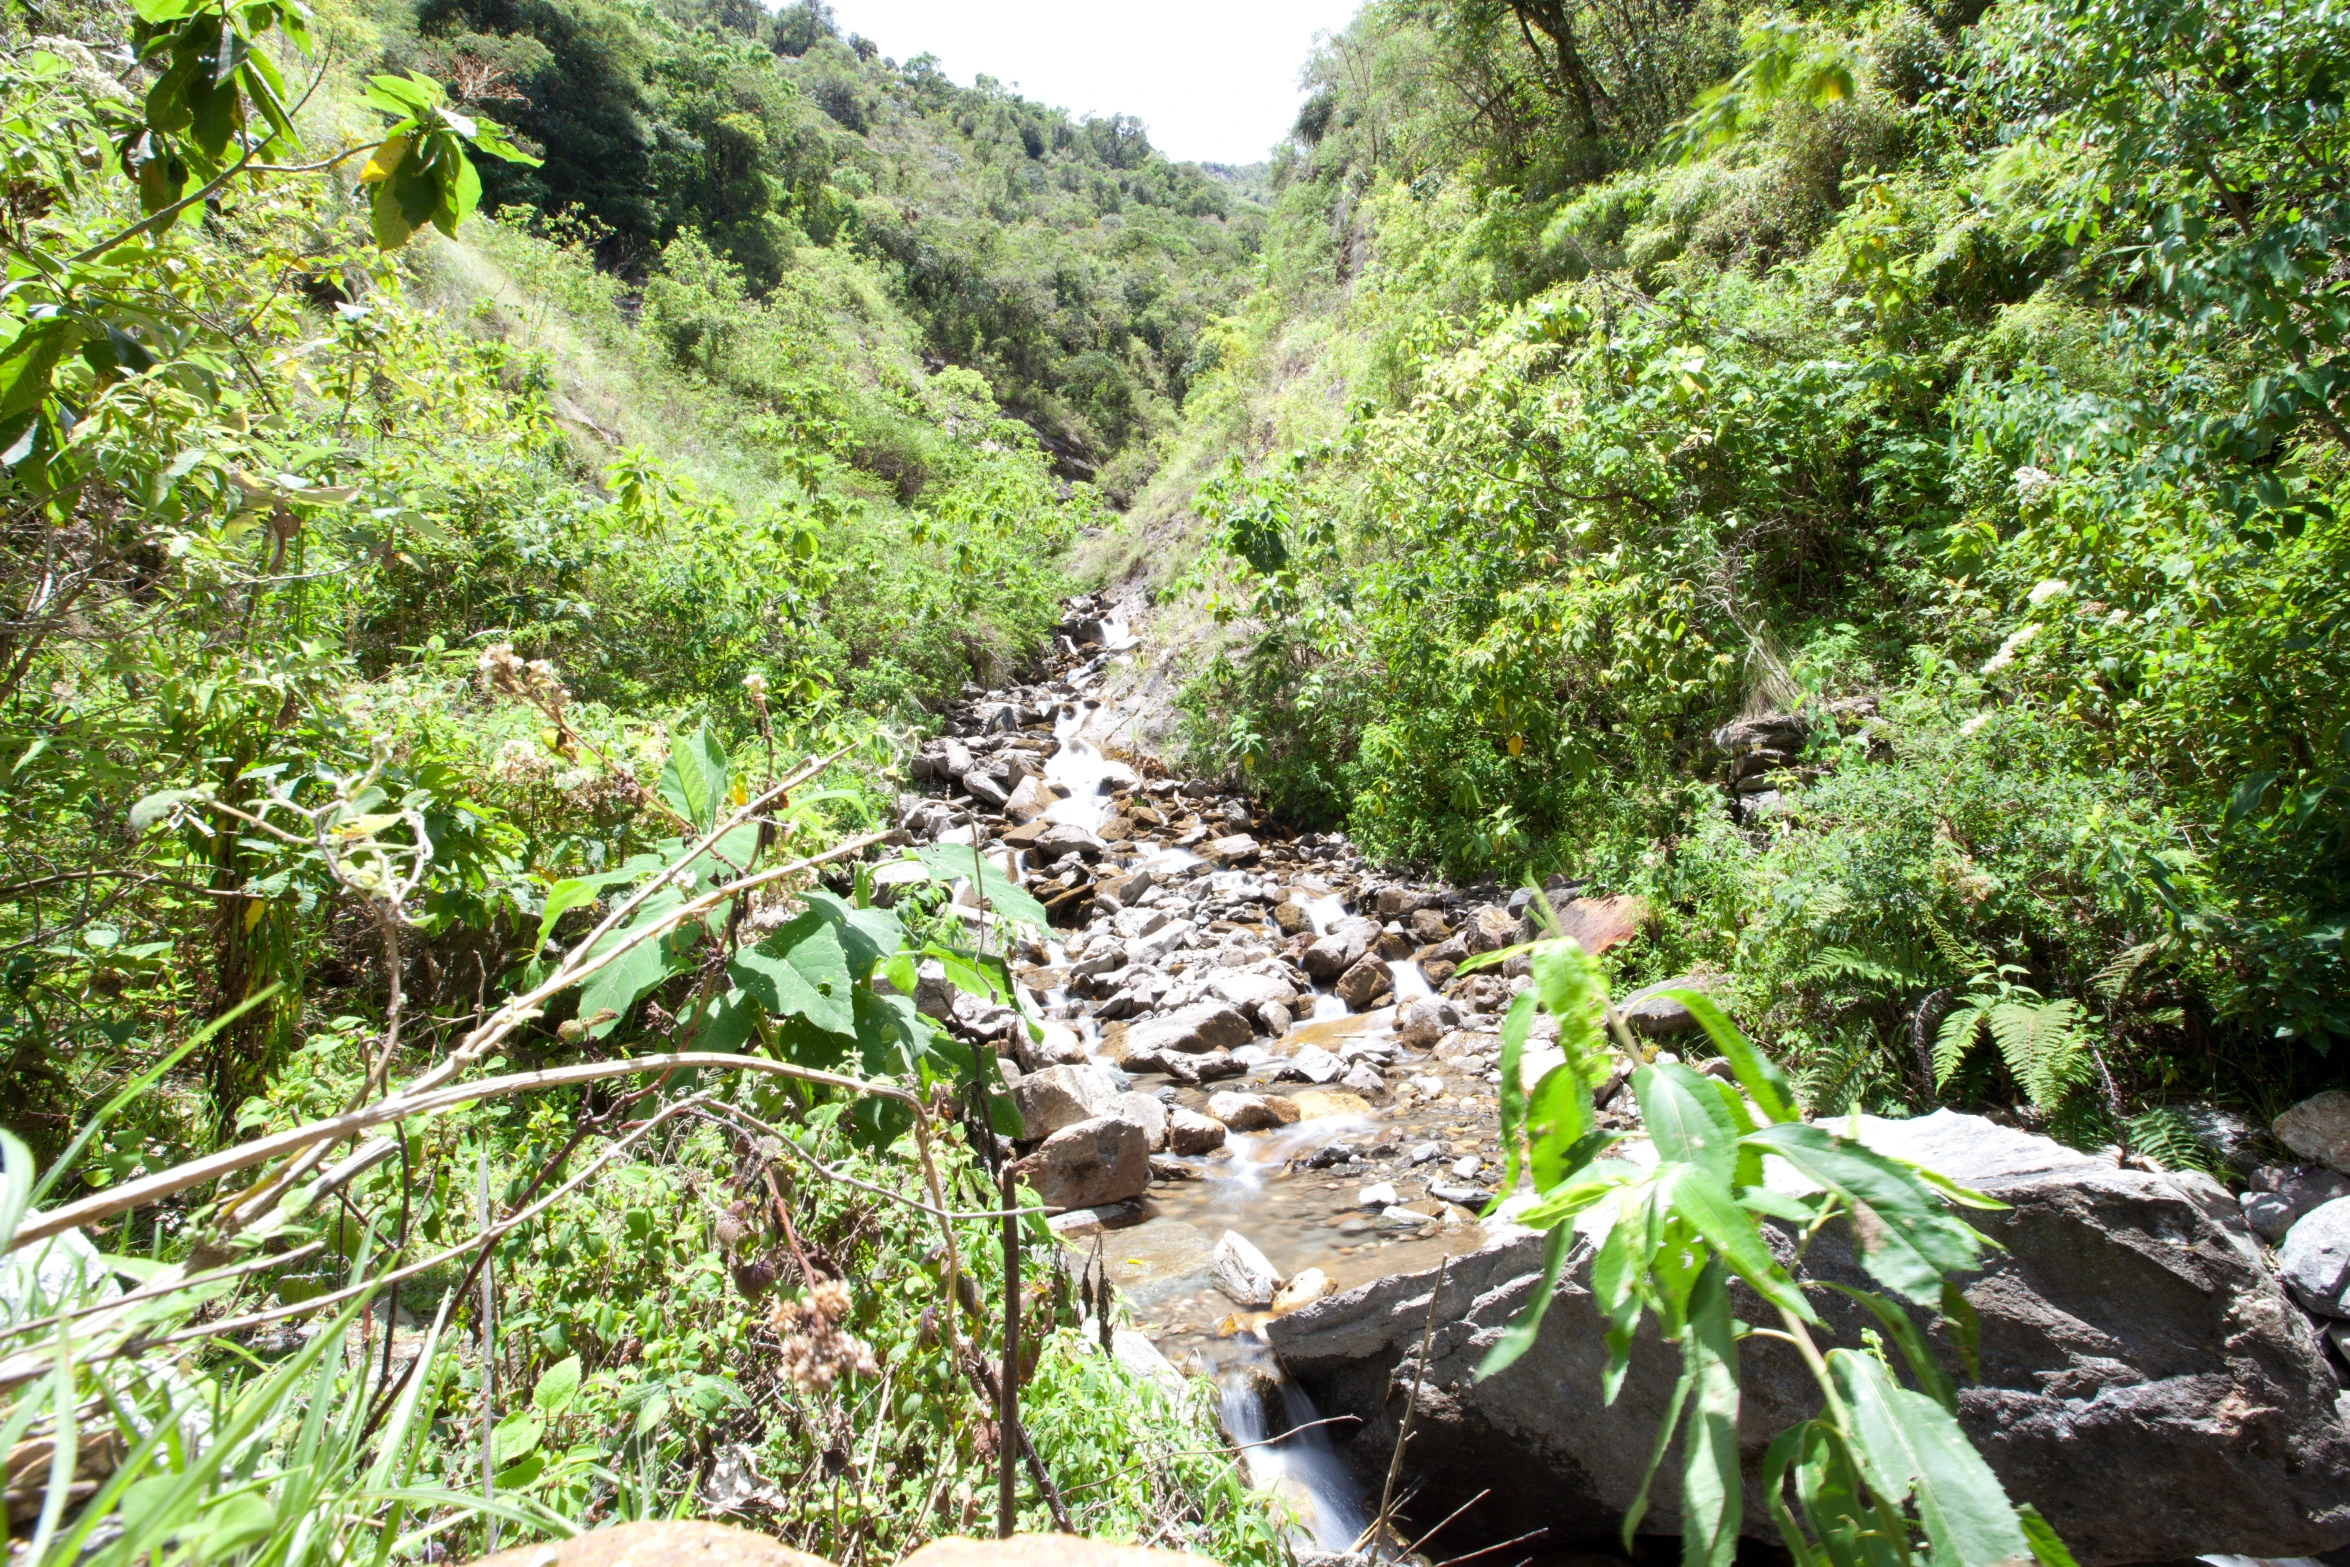 there is a small stream running through the jungle